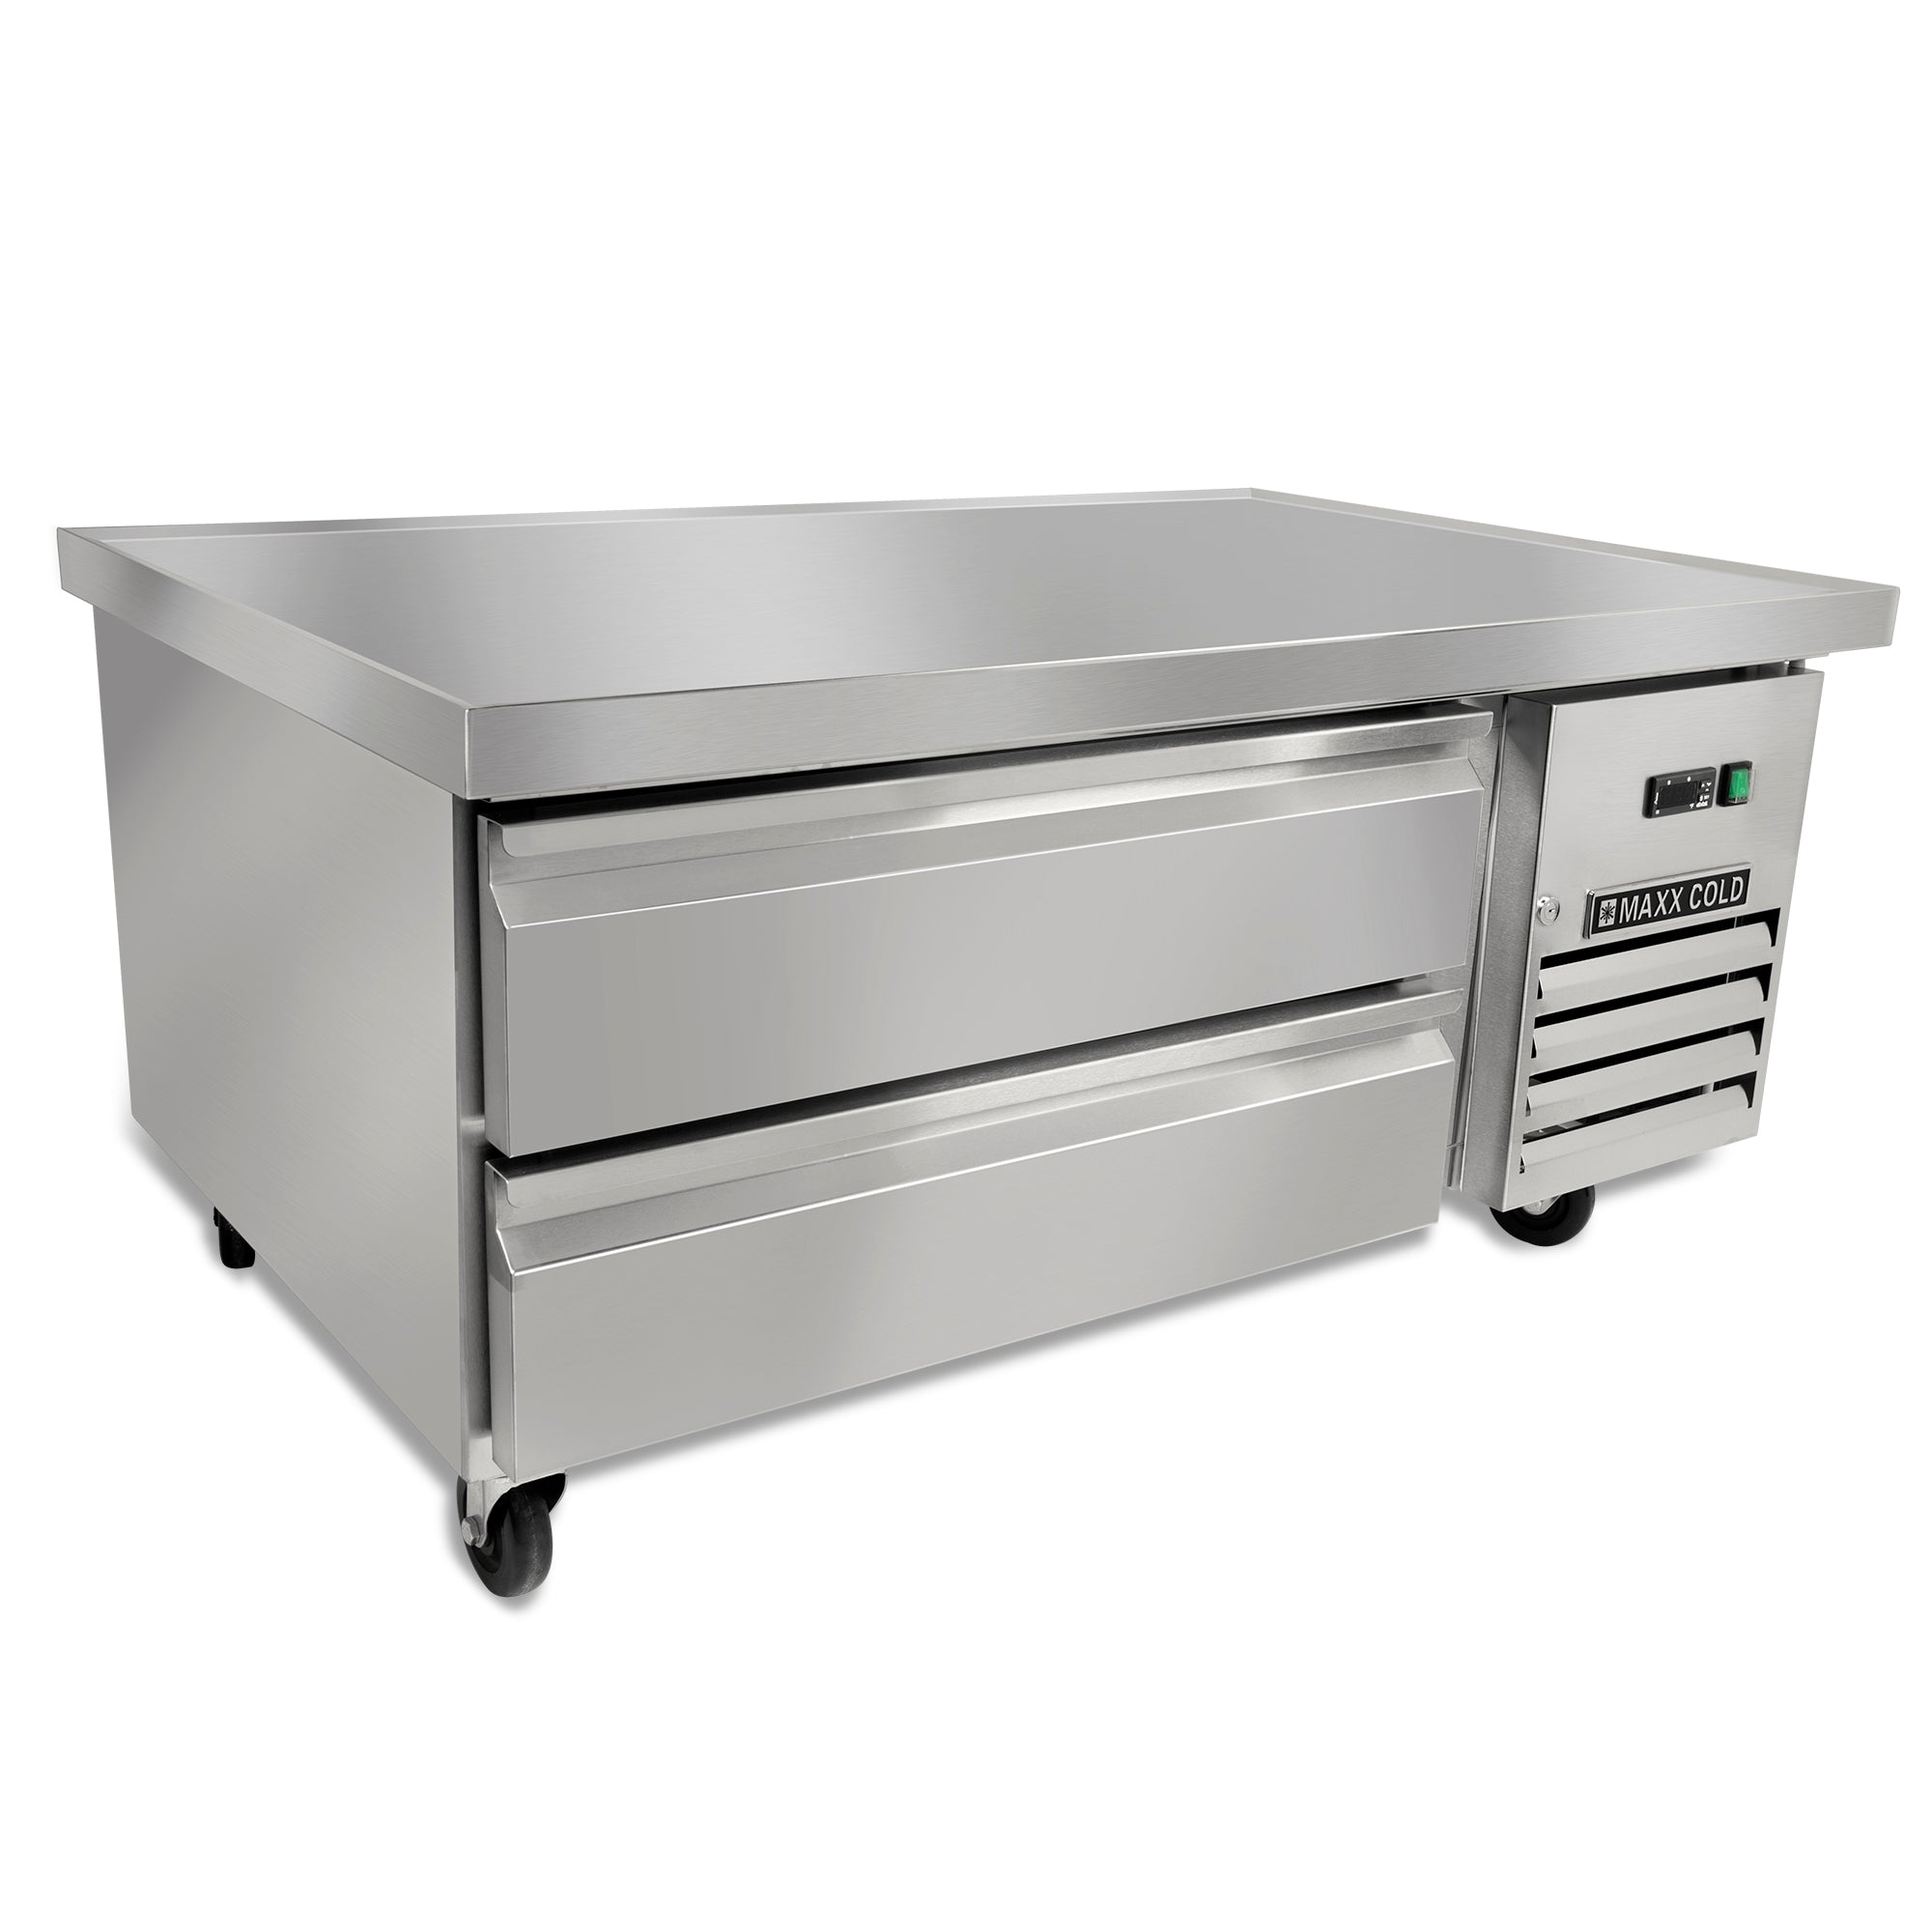 Maxx Cold - MXCB48HC, Maxx Cold Two-Drawer Refrigerated Chef Base, 50"W, 6.5 cu. ft. Storage Capacity, in Stainless Steel